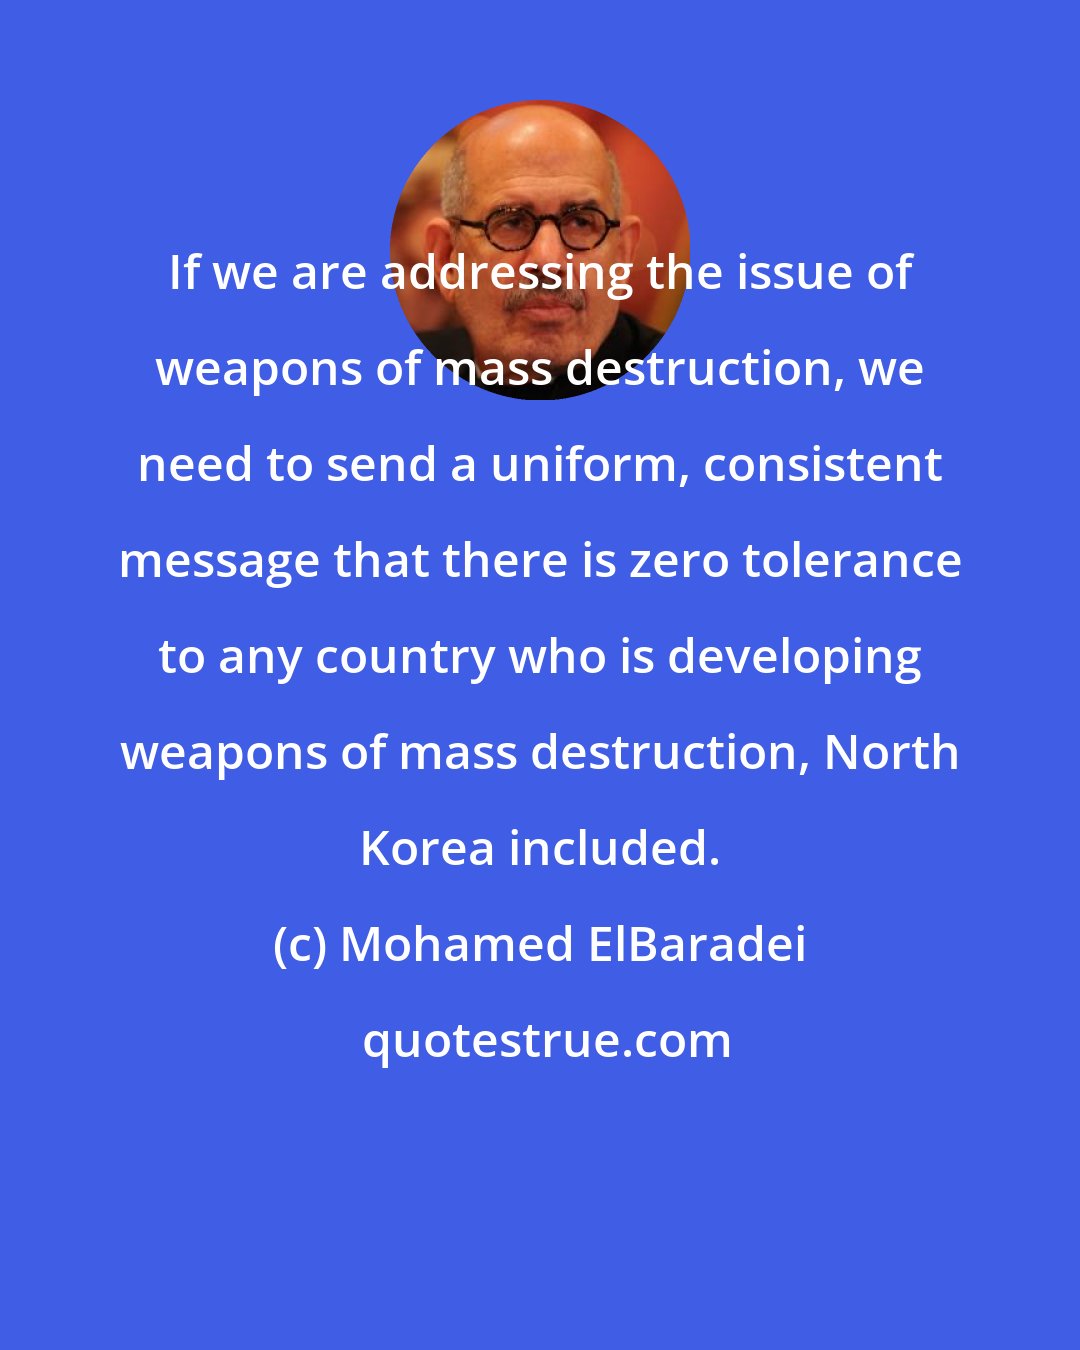 Mohamed ElBaradei: If we are addressing the issue of weapons of mass destruction, we need to send a uniform, consistent message that there is zero tolerance to any country who is developing weapons of mass destruction, North Korea included.